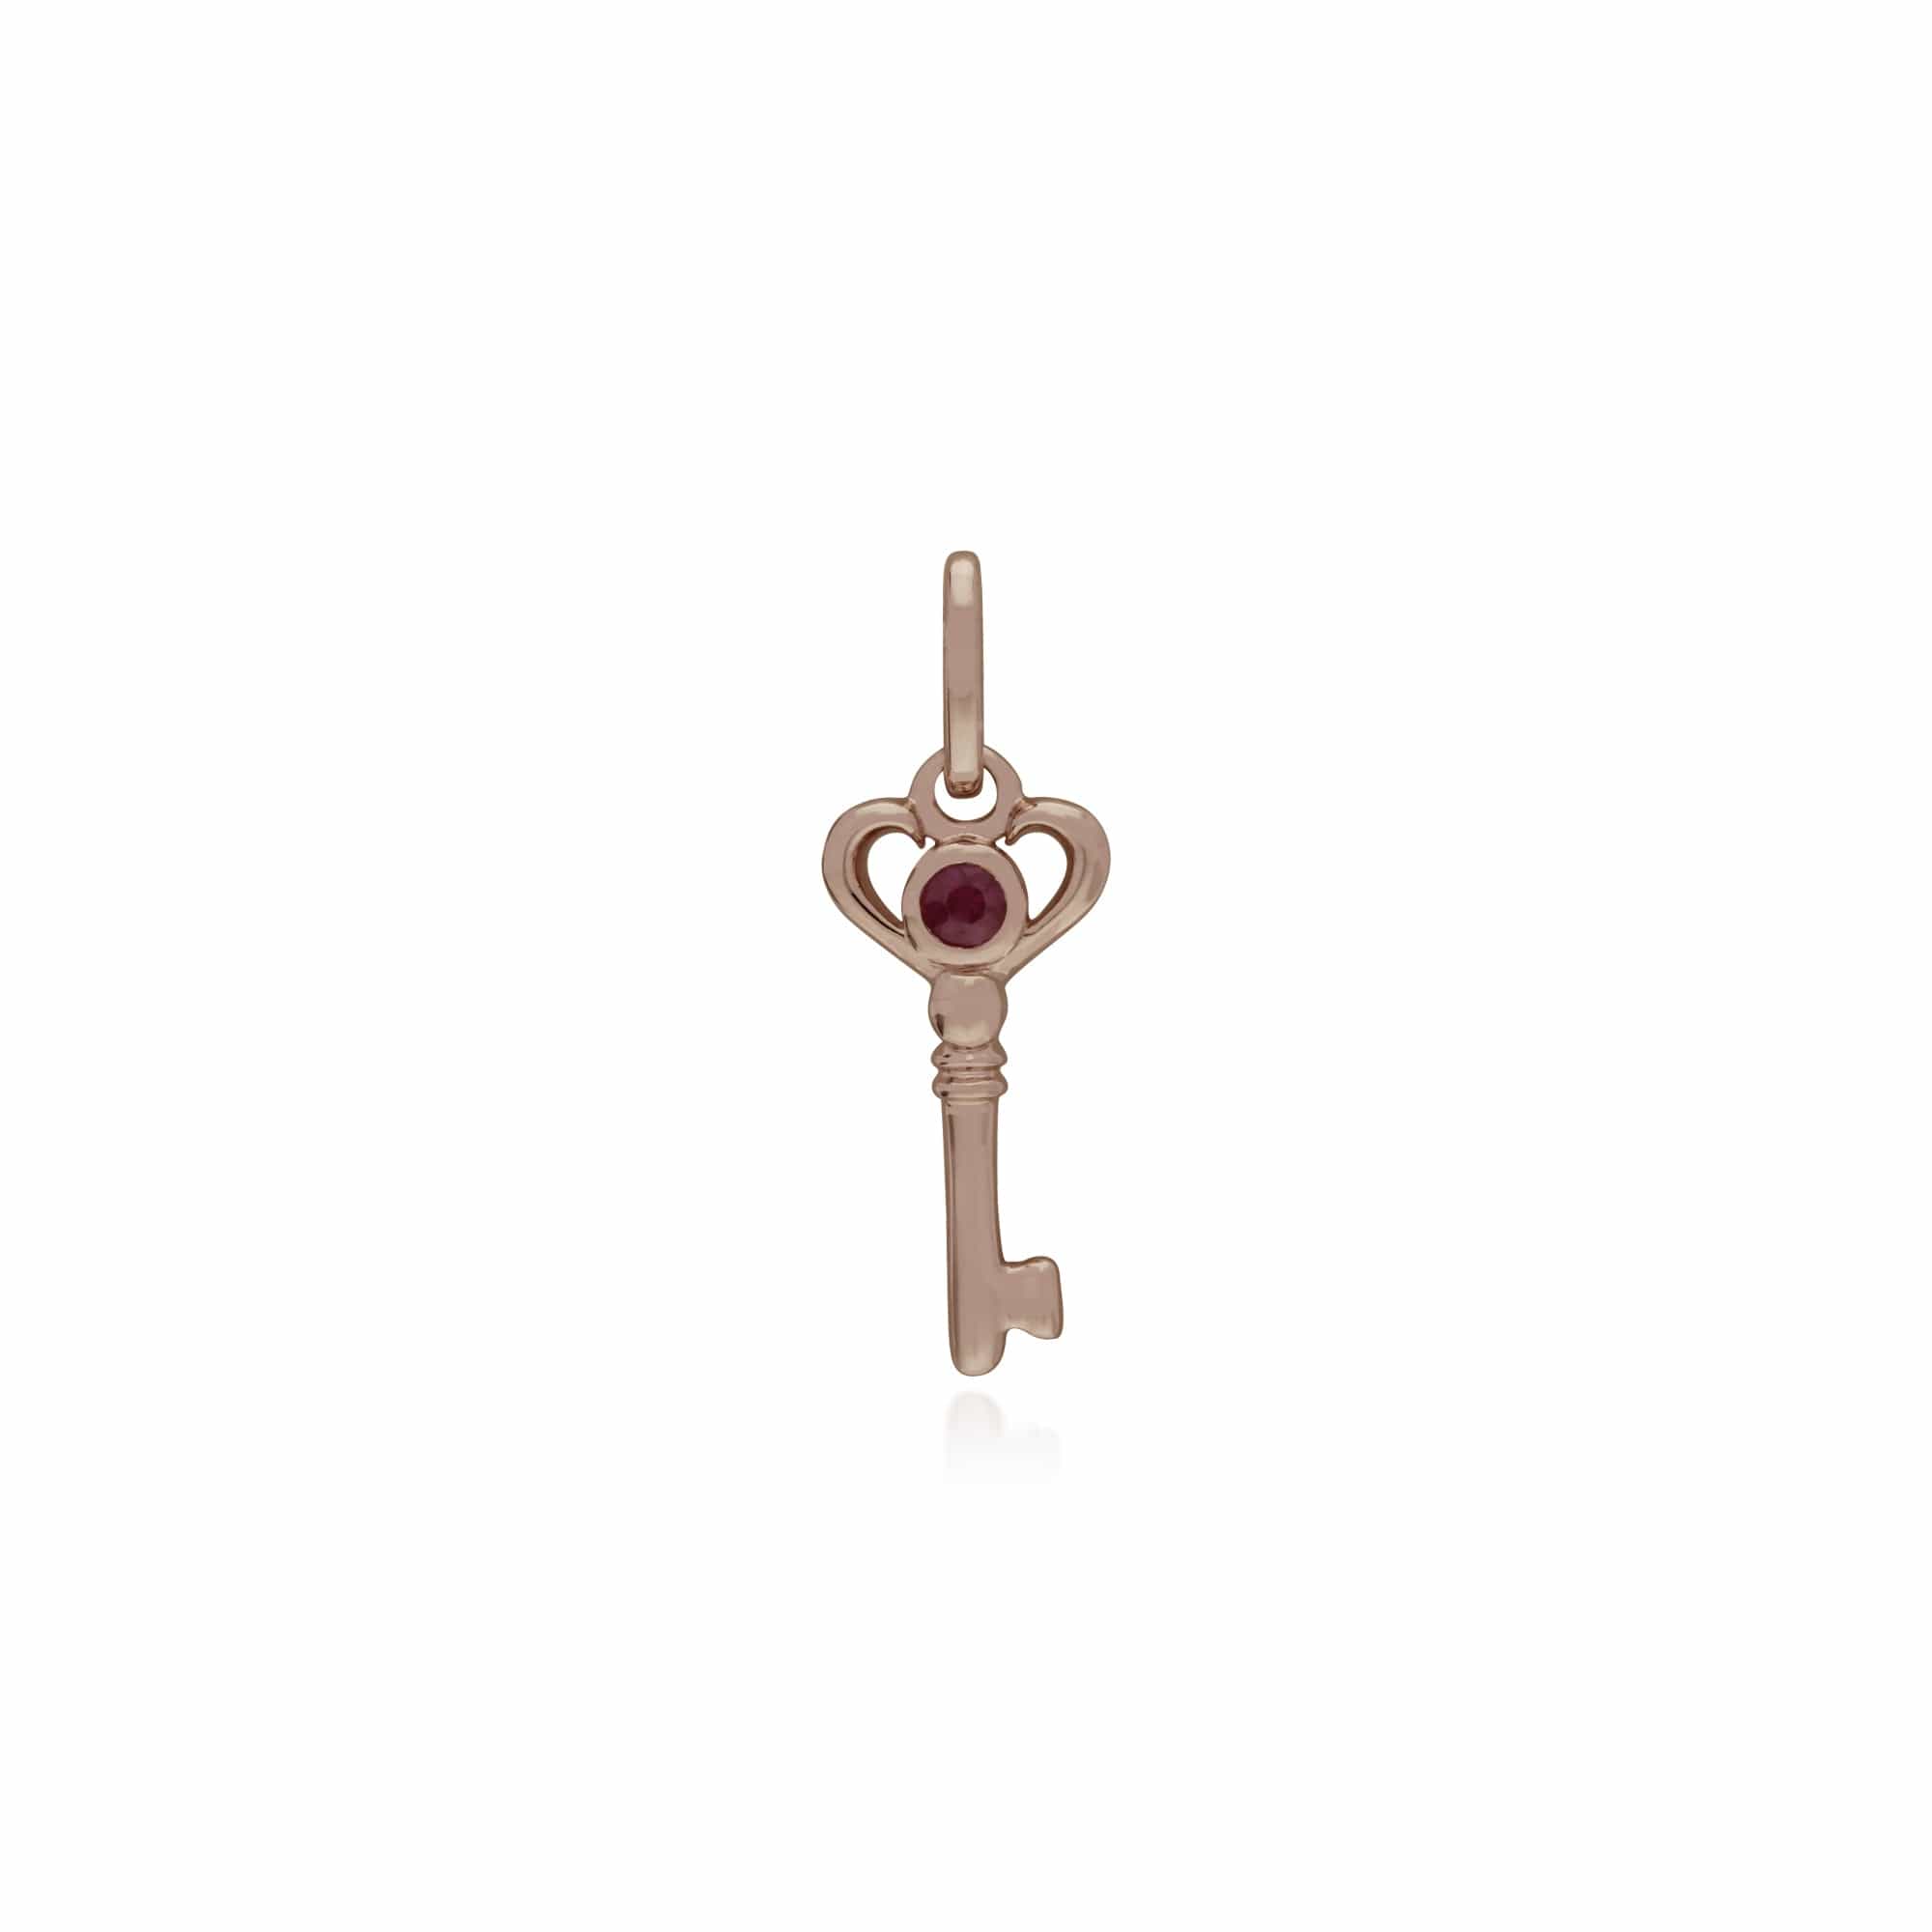 270P026301925-270P026901925 Classic Heart Lock Pendant & Ruby Key Charm in Rose Gold Plated 925 Sterling Silver 2